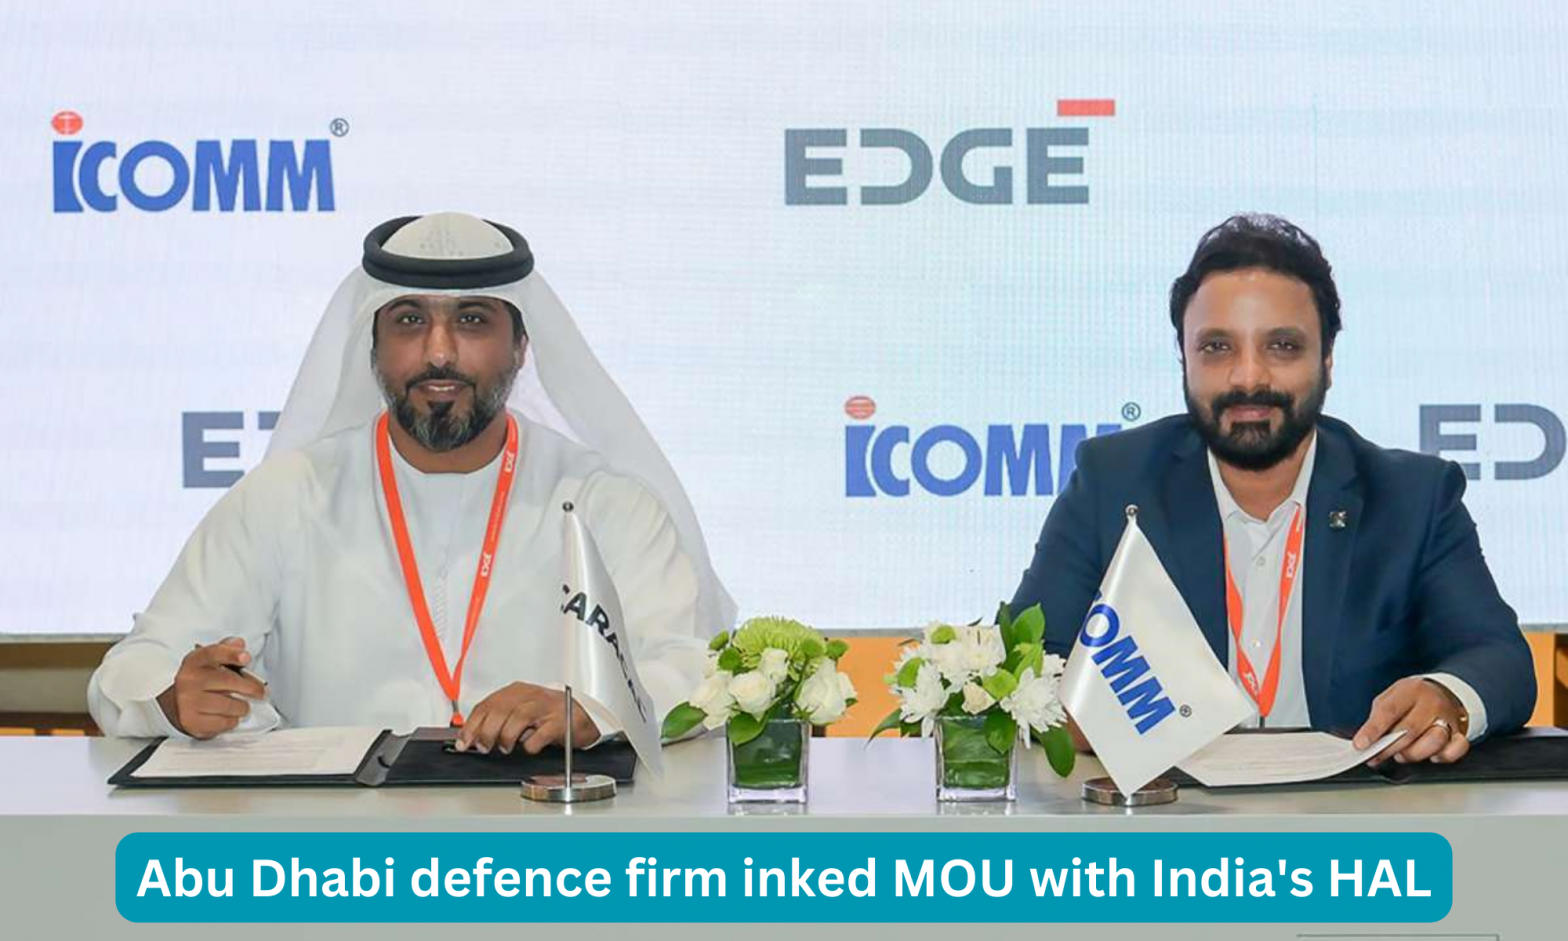 Abu Dhabi defence firm inked MOU with India's HAL